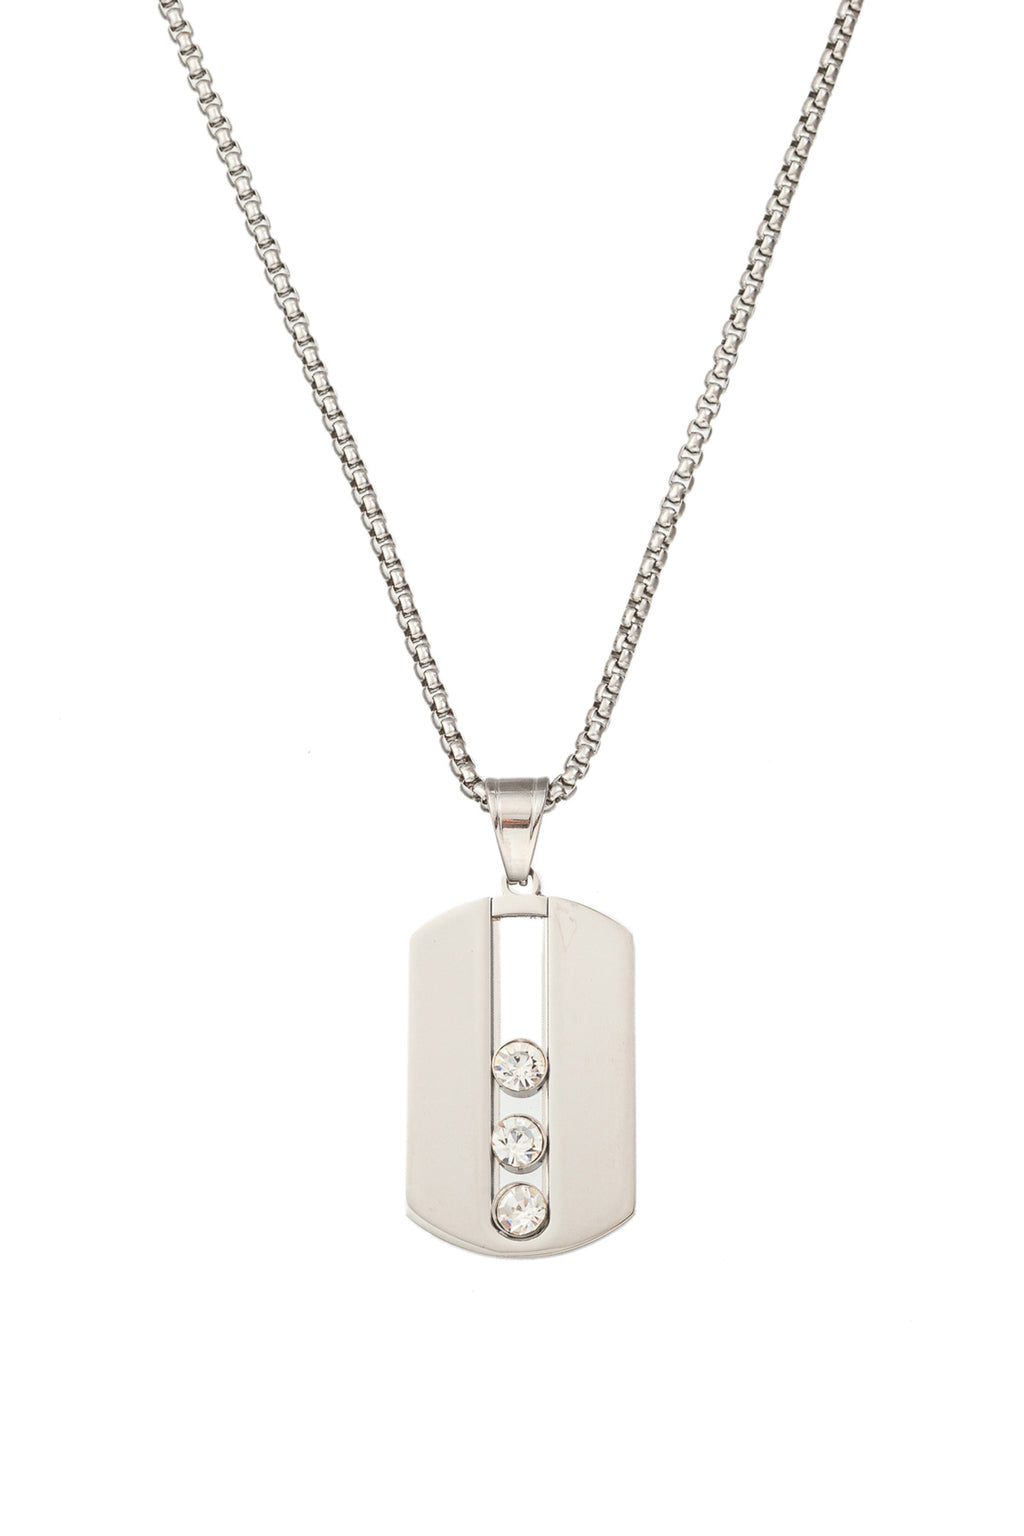 Silver tone titanium dog tag necklace studded with CZ crystals.